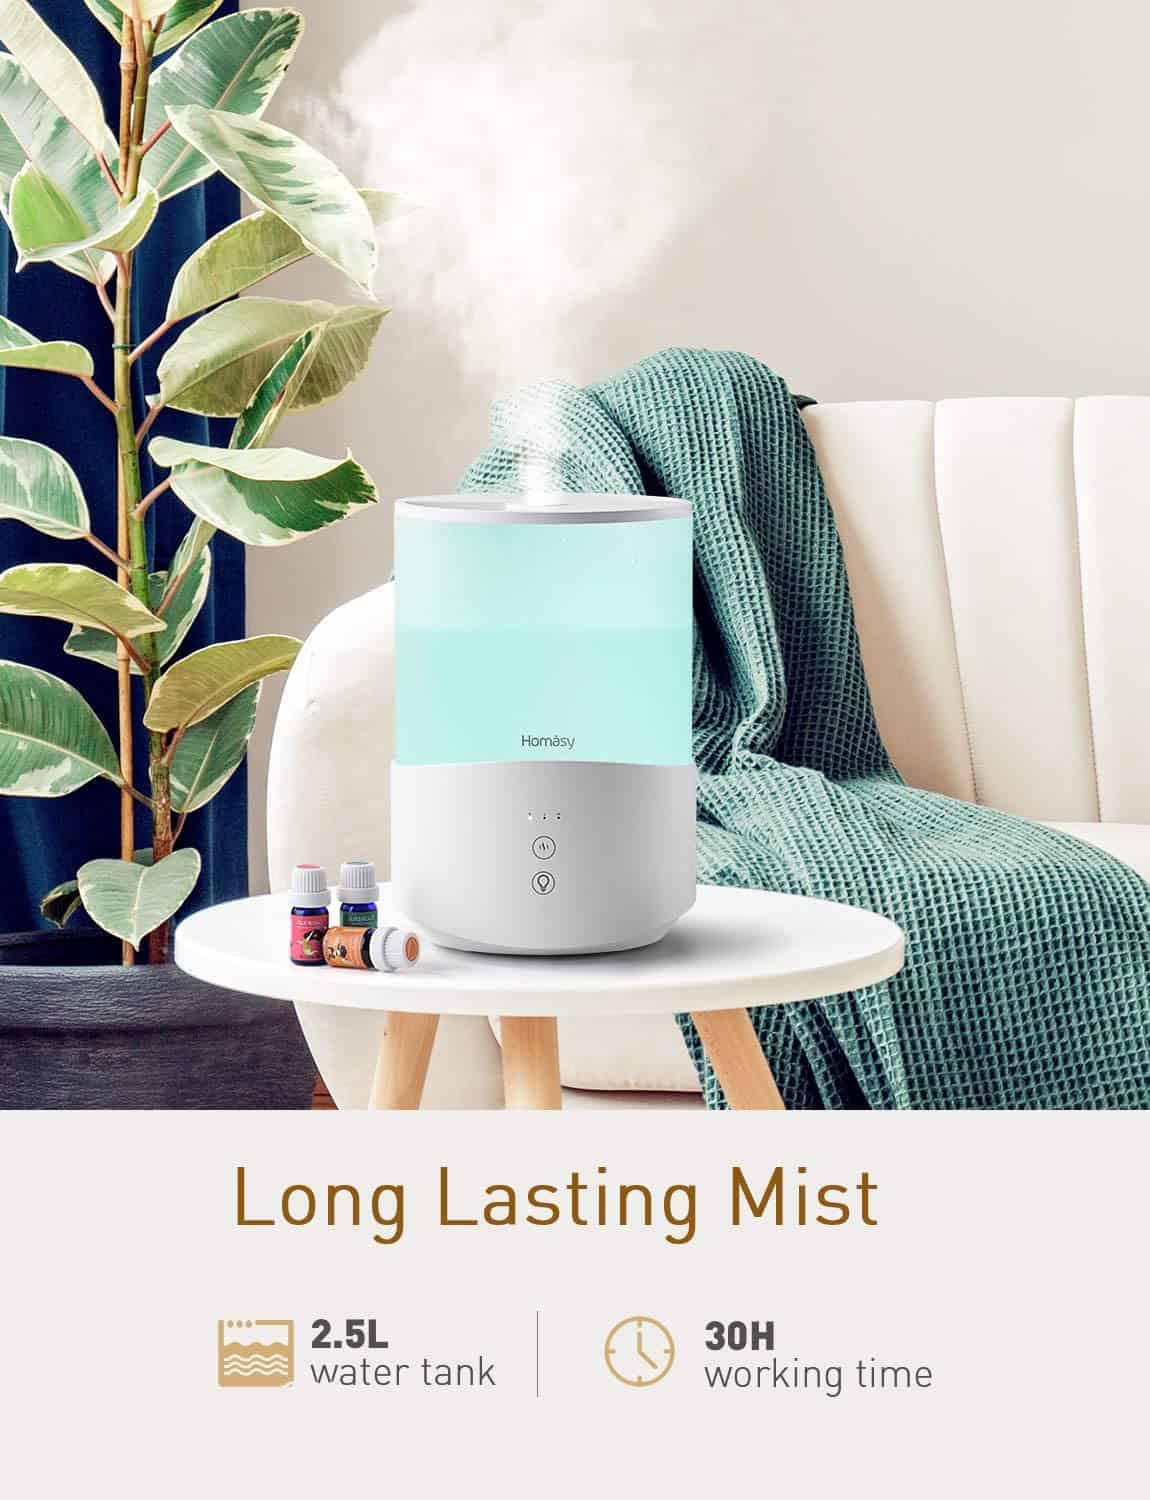 Homasy Cool Mist Humidifier Diffuser Review | Essential Oil Diffuser ...